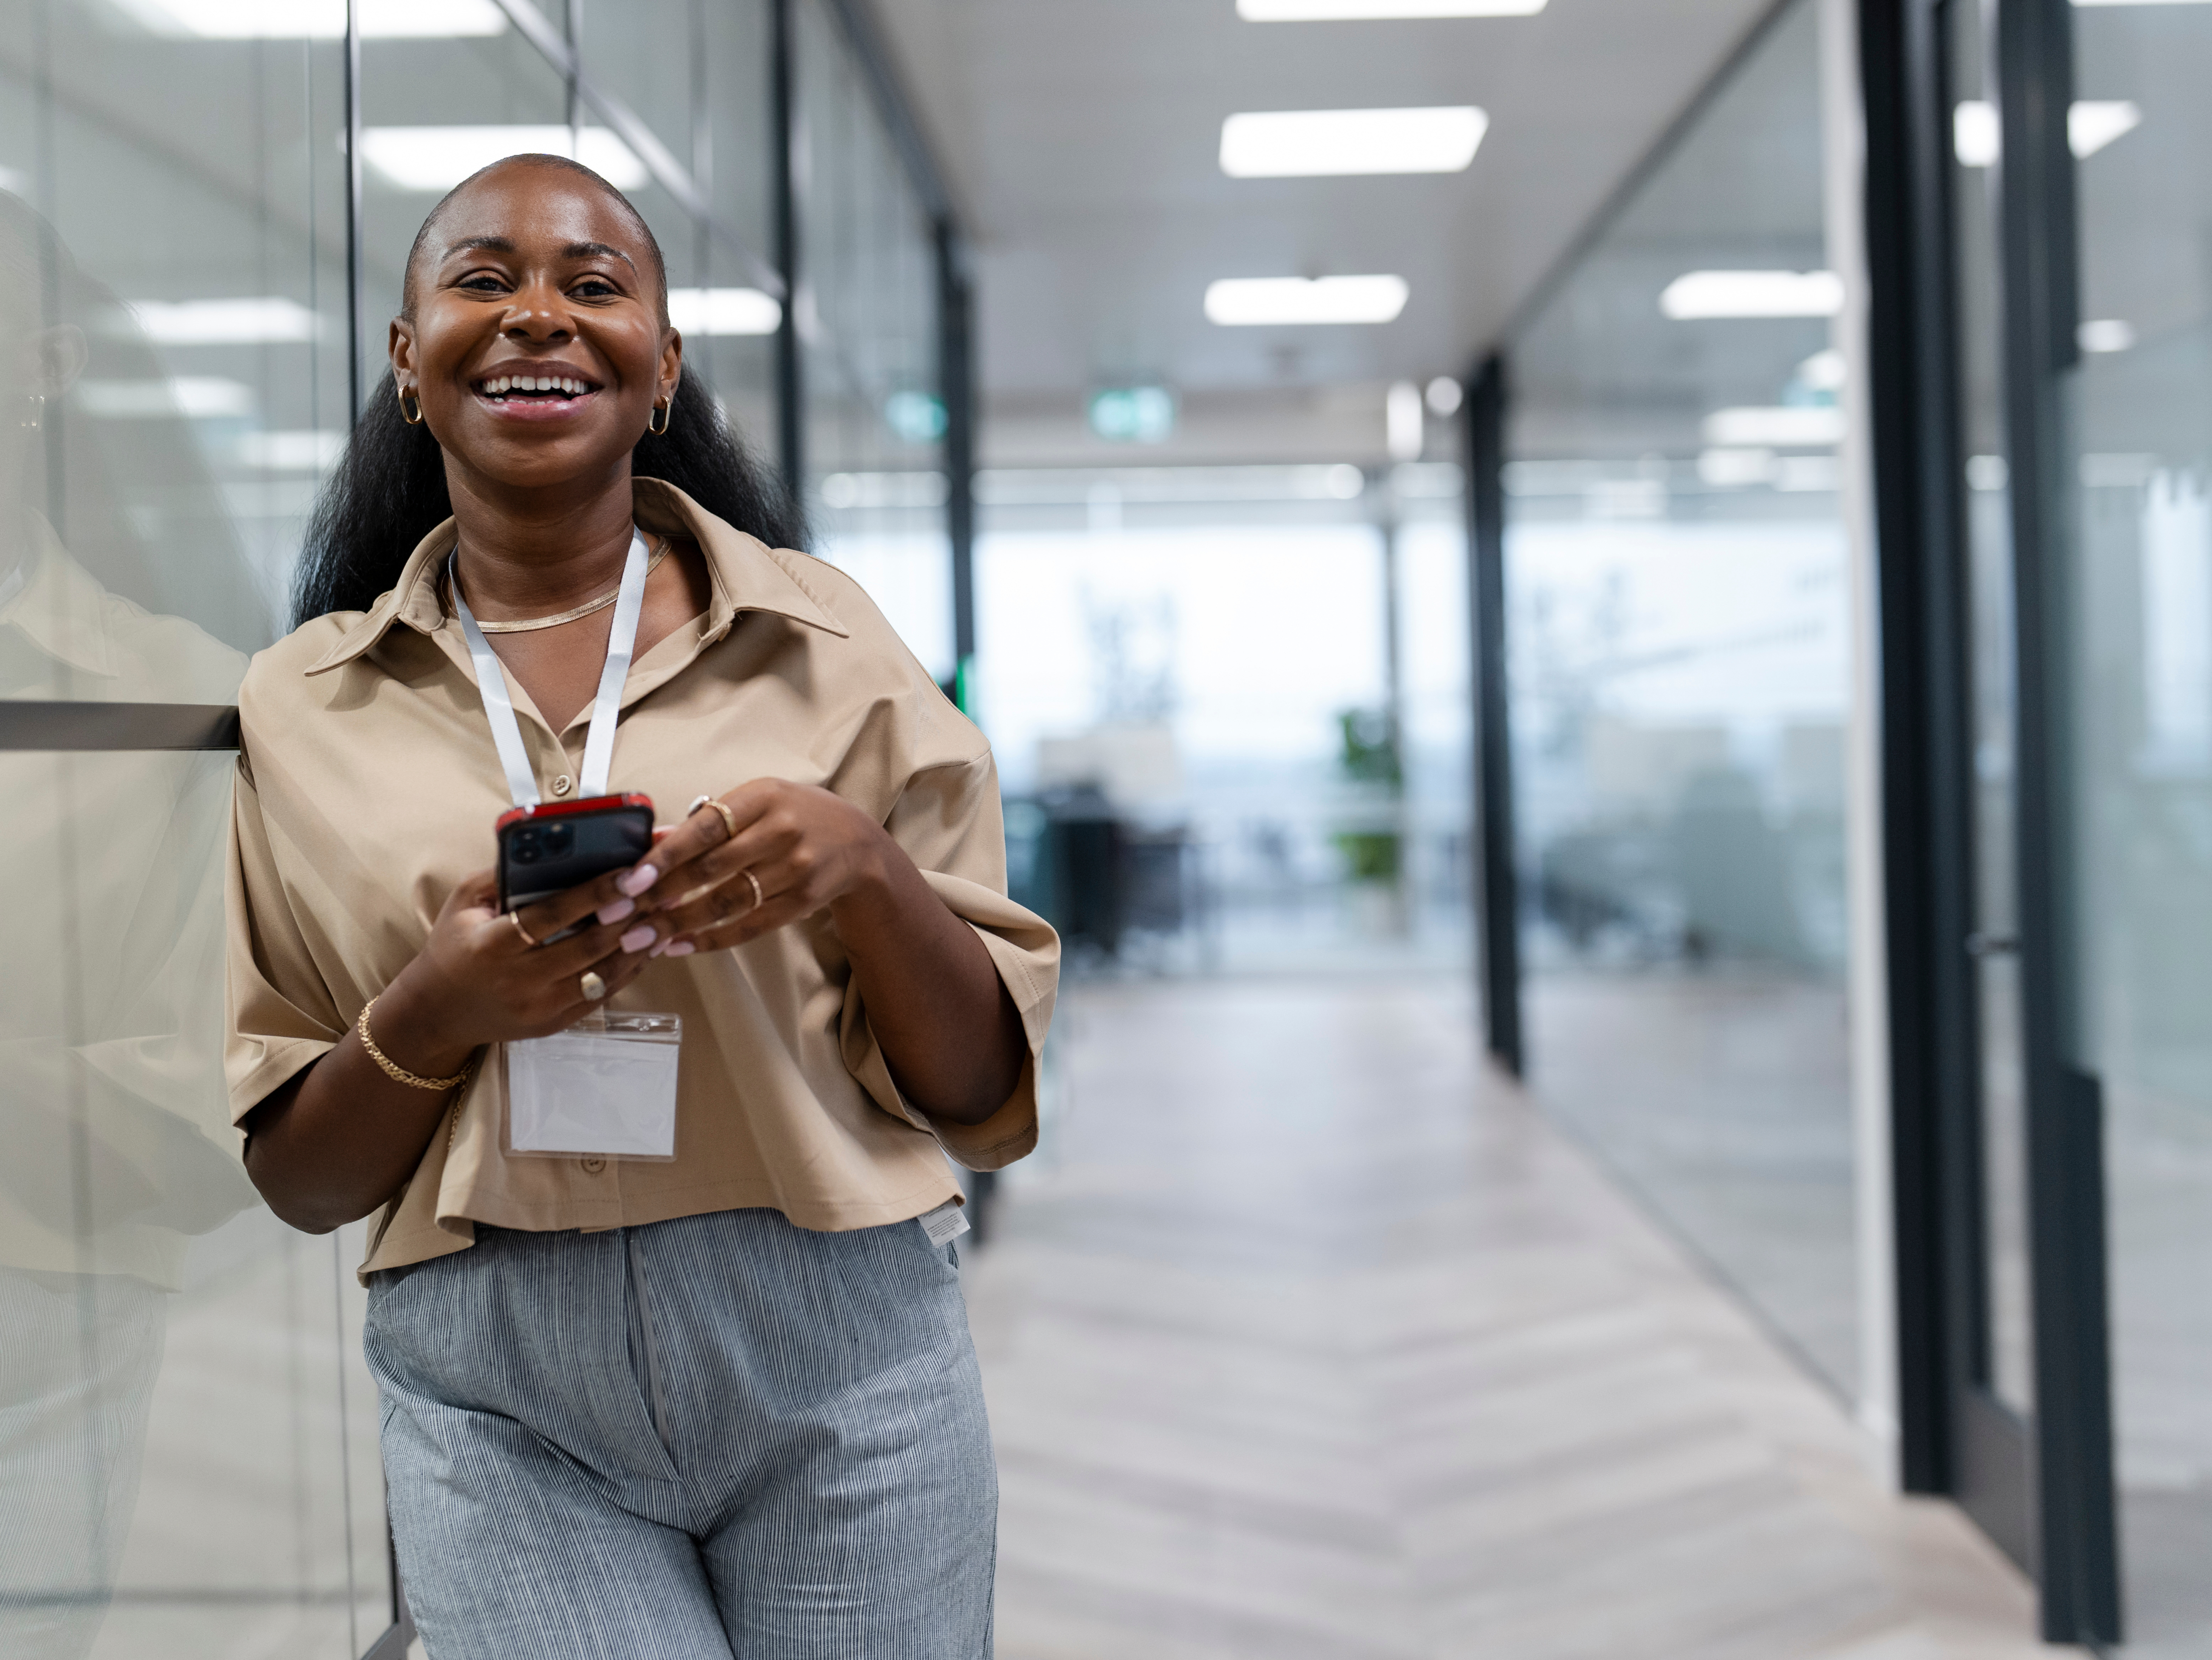 photo of an employee smiling while holding her phone in an office